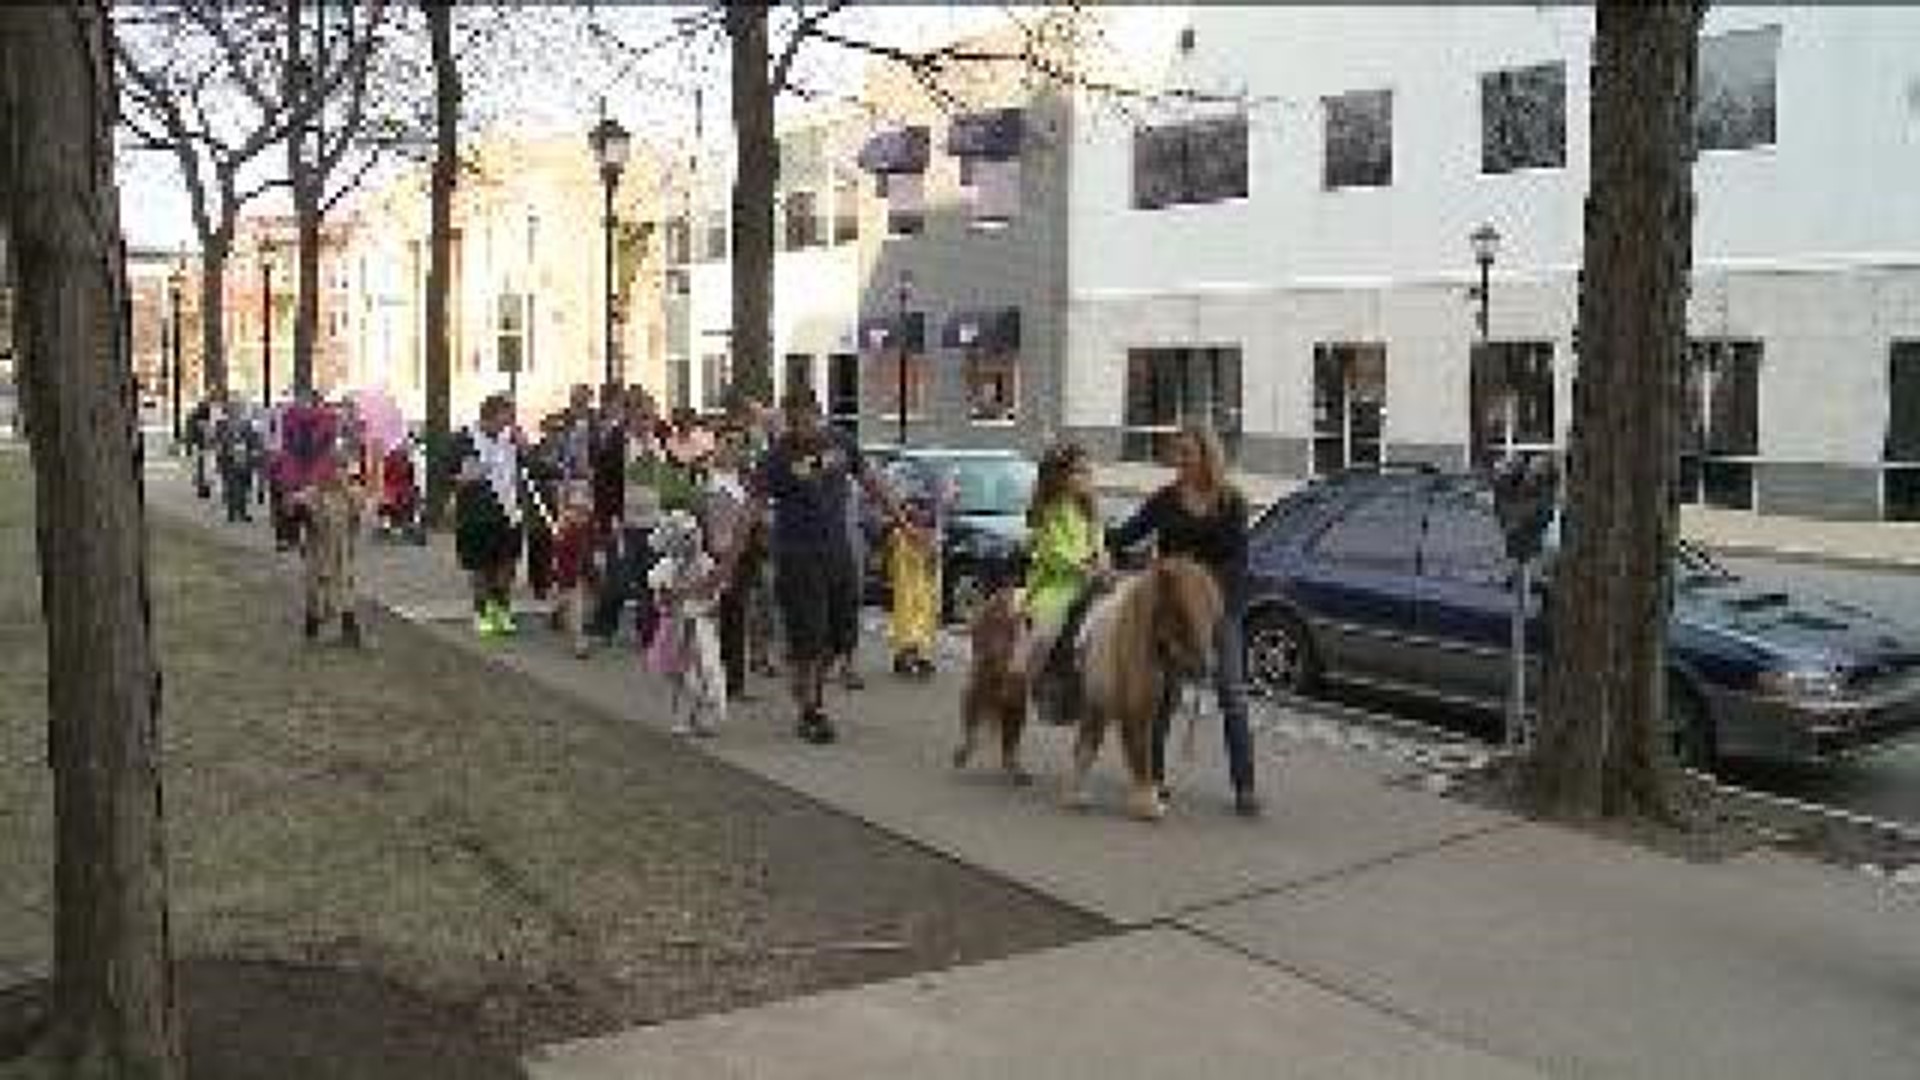 Procession Through Wilkes-Barre Commemorates Palm Sunday